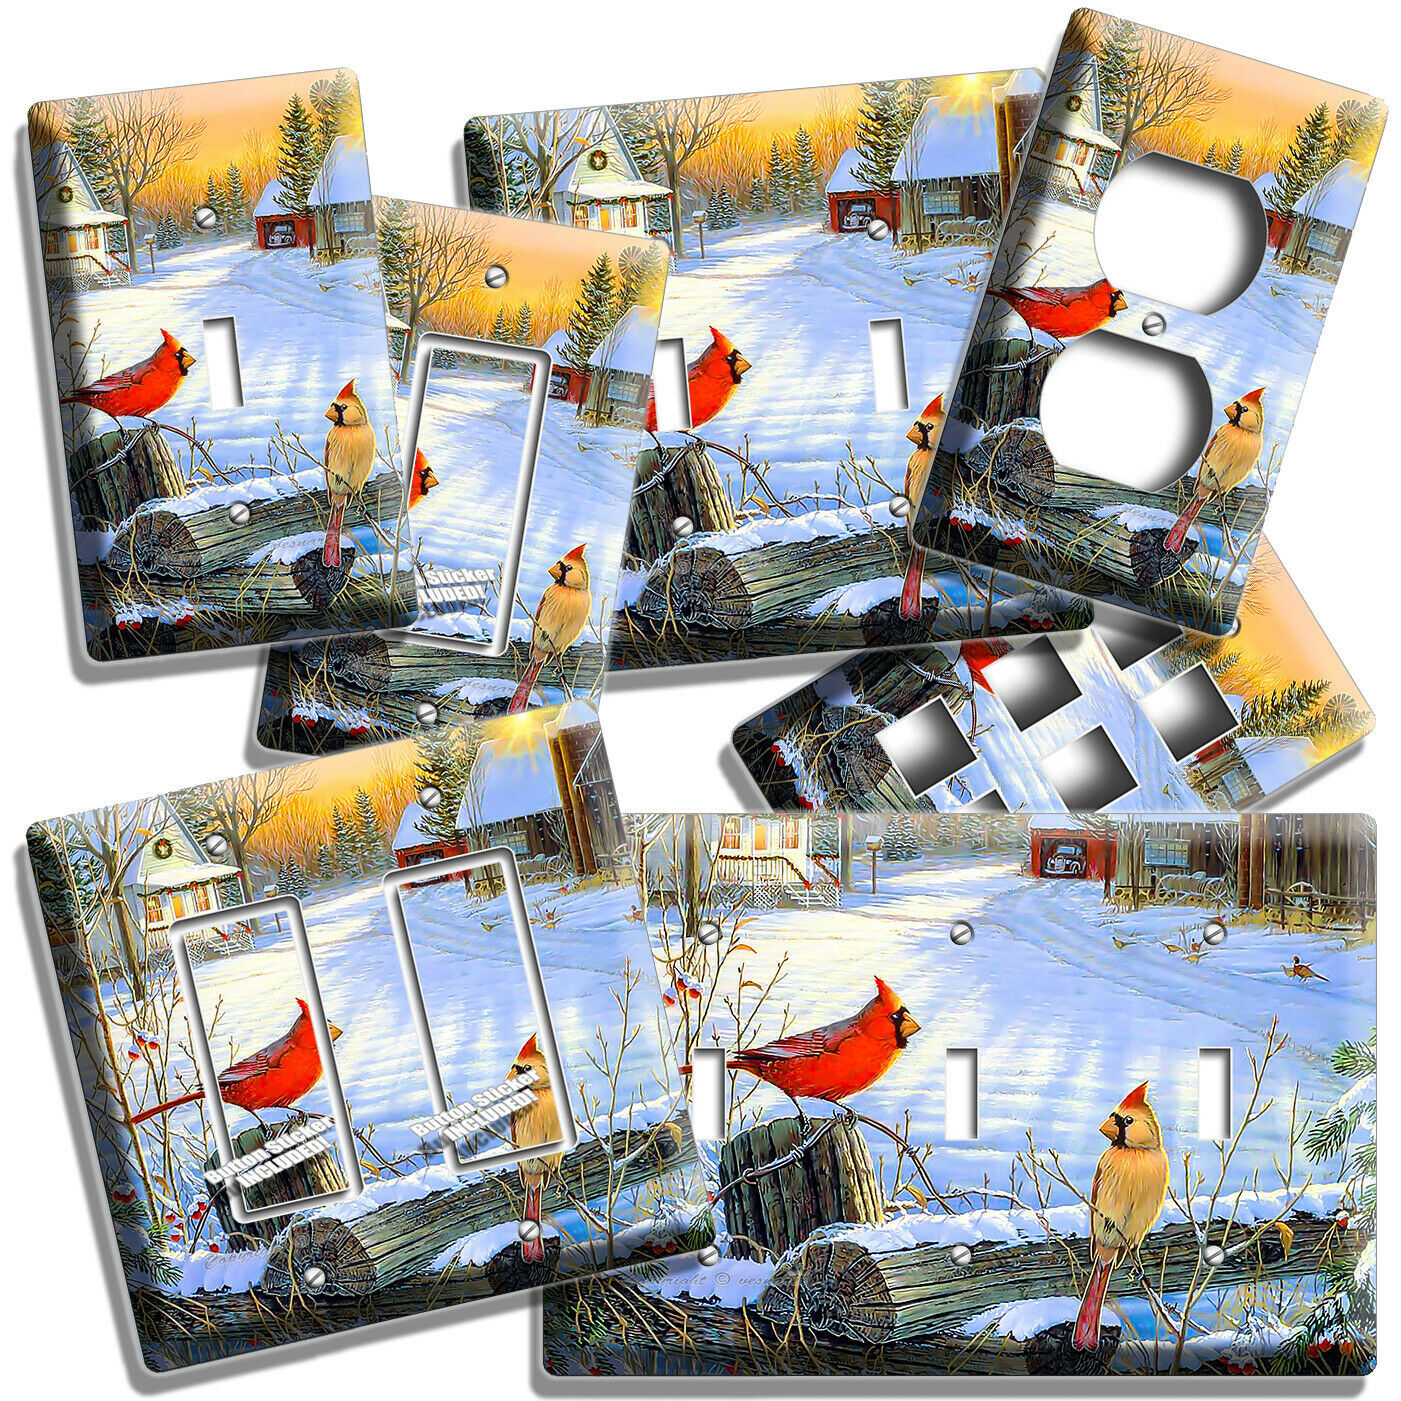 CARDINAL BIRDS CONTRY WINTER MORNING LIGHT SWITCH OUTLET WALL PLATES ROOM DECOR - $16.55 - $26.67